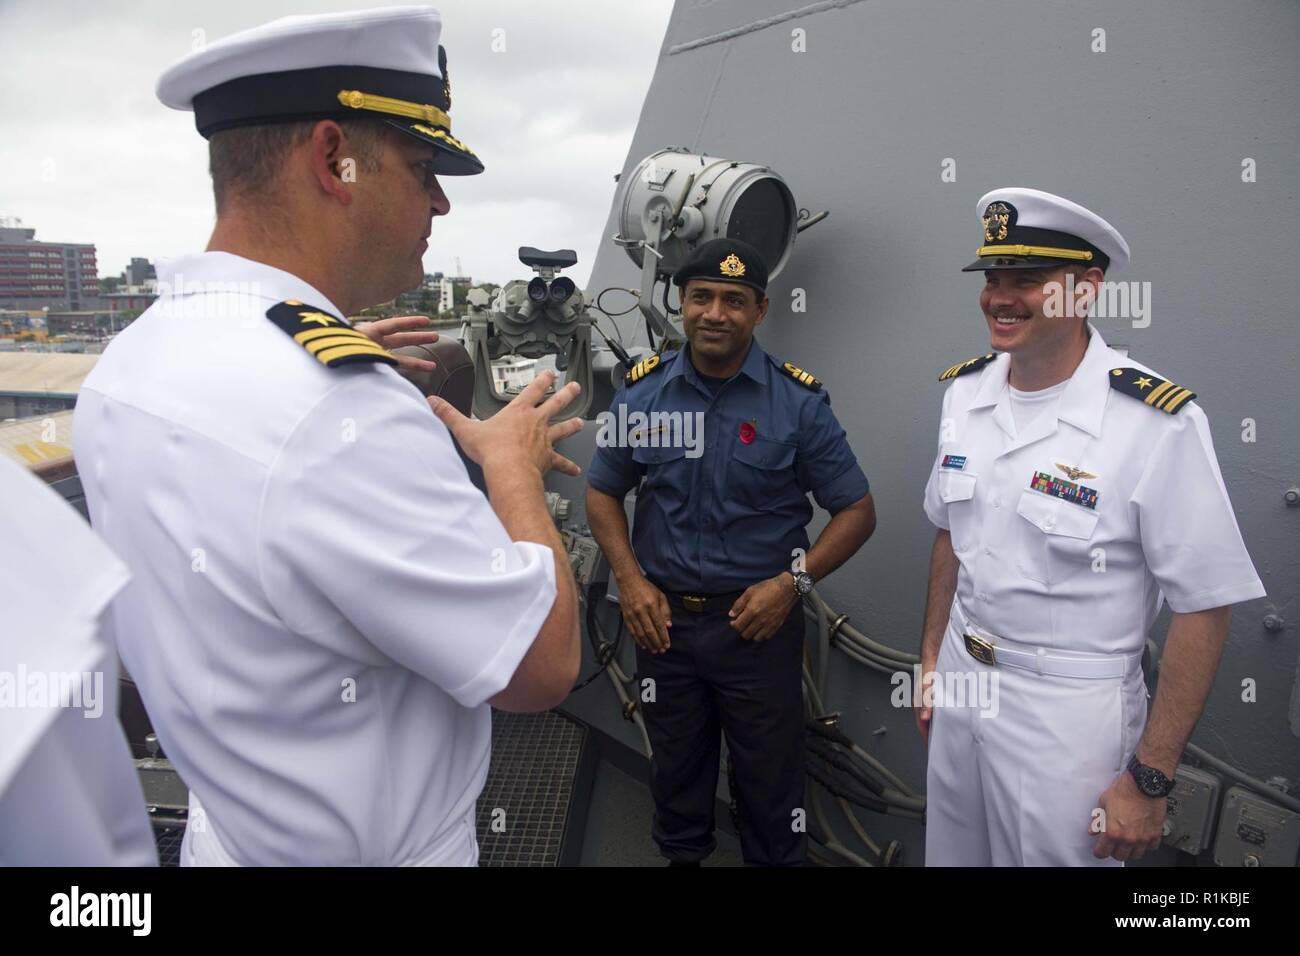 PORT OF SUVA, Fiji (Oct. 14, 2018) Cmdr. Andy Strickland, commanding officer of Arleigh Burke-class guided-missile destroyer USS Shoup (DDG 86), talks with Cmdr. Ledua Yaco, Republic of Fiji Military Forces, and Lt. Cmdr. William Hinson, on the bridgewing as the ship pulls into the Port of Suva, Fiji Oct. 14, 2018. Shoup is currently participating in the Oceania Maritime Security Initiative (OMSI) program, a Secretary of Defense program leveraging Department of Defense assets transiting the region to increase the Coast Guard’s maritime domain awareness, ultimately supporting its maritime law e Stock Photo